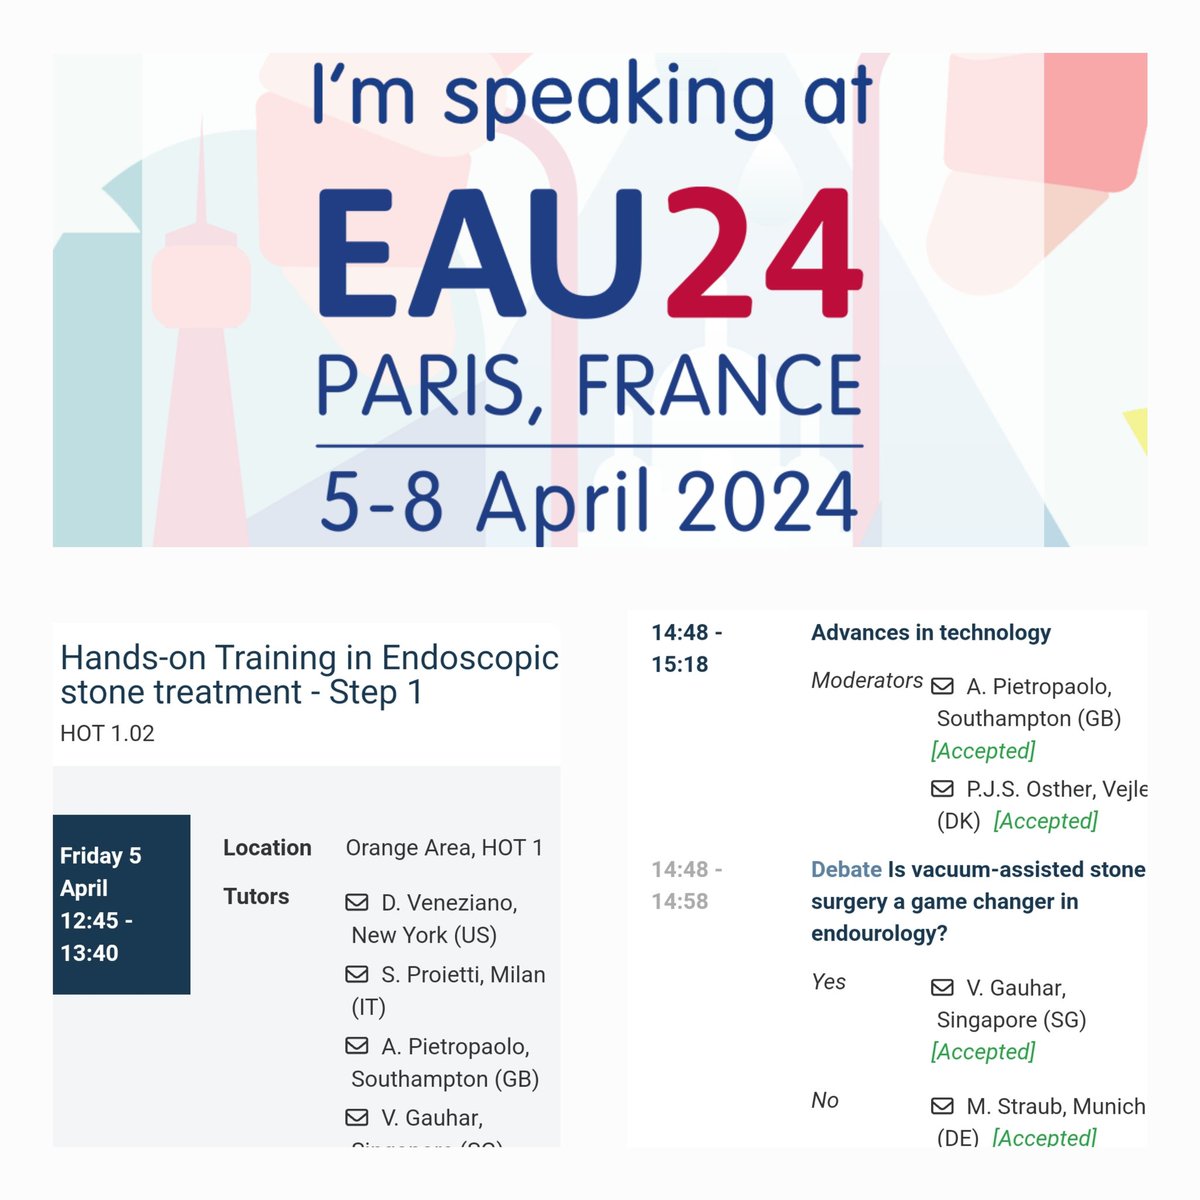 Look forward to meeting all friends #EAU24 Just us for exciting programmes #HOTS #Endourology good wishes to all my colleagues for the exciting 15 abstracts we will present together #UroSoMe @ameliapietr1 @sproietti81 @endouro @OstherPalle @eulis_uroweb @PEARLSendouro